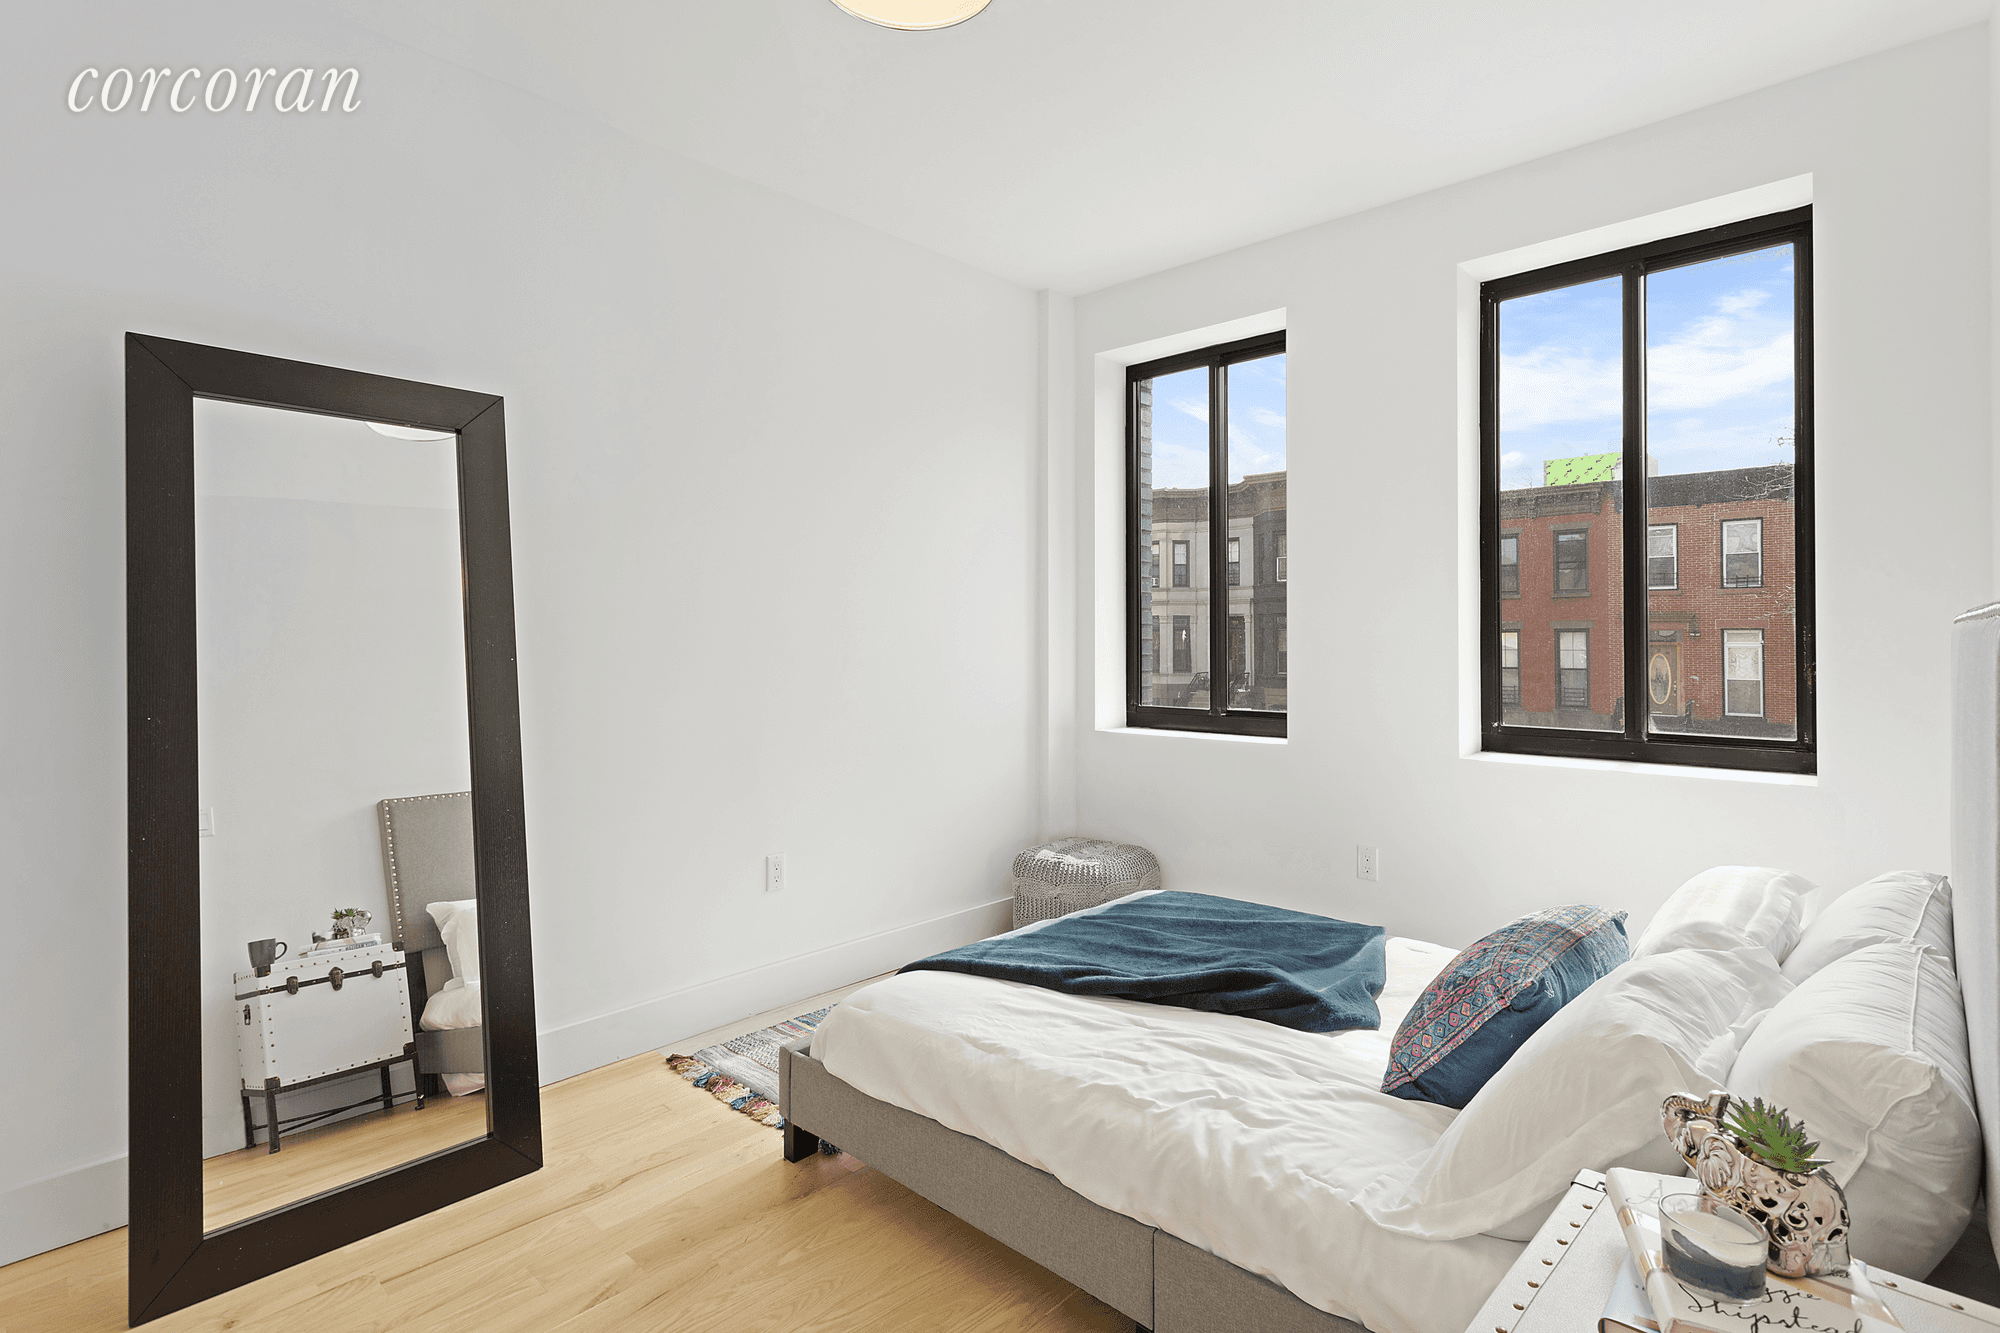 Immediate occupancy ! 813 Jefferson is a brand new 8 unit boutique condominium in the heart of thriving Bedford Stuyvesant.